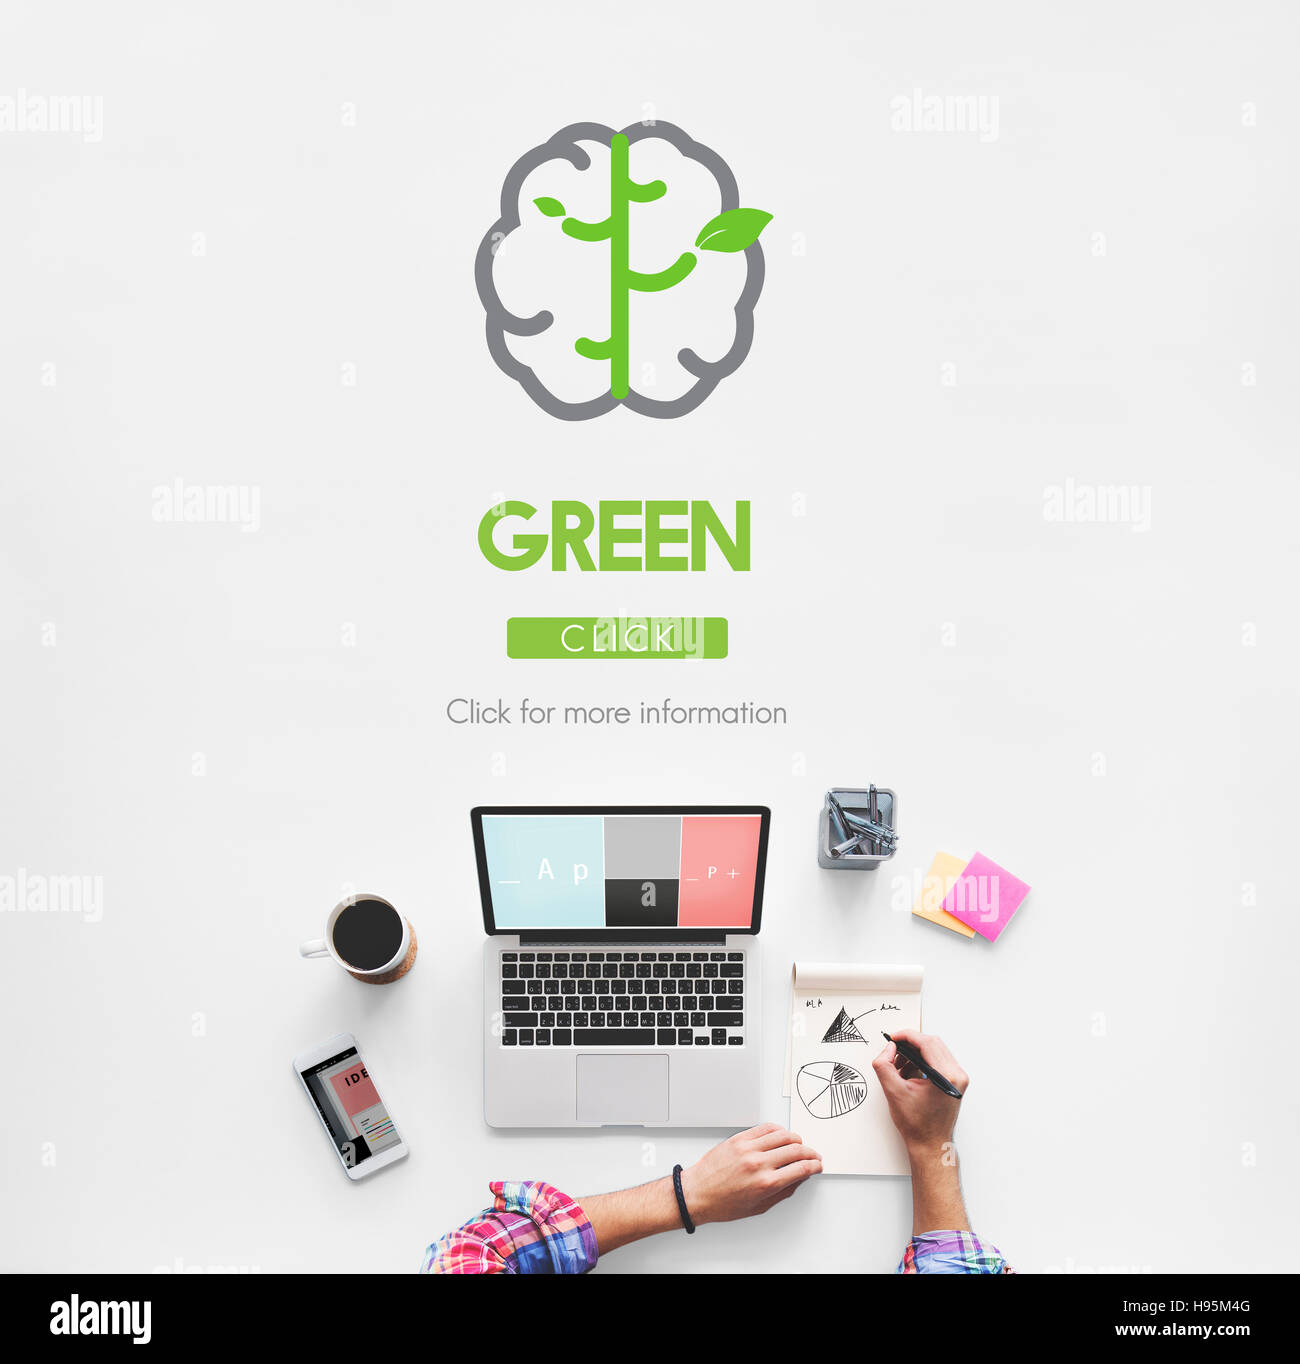 Go Green Refresh Think Green Concept Stock Photo